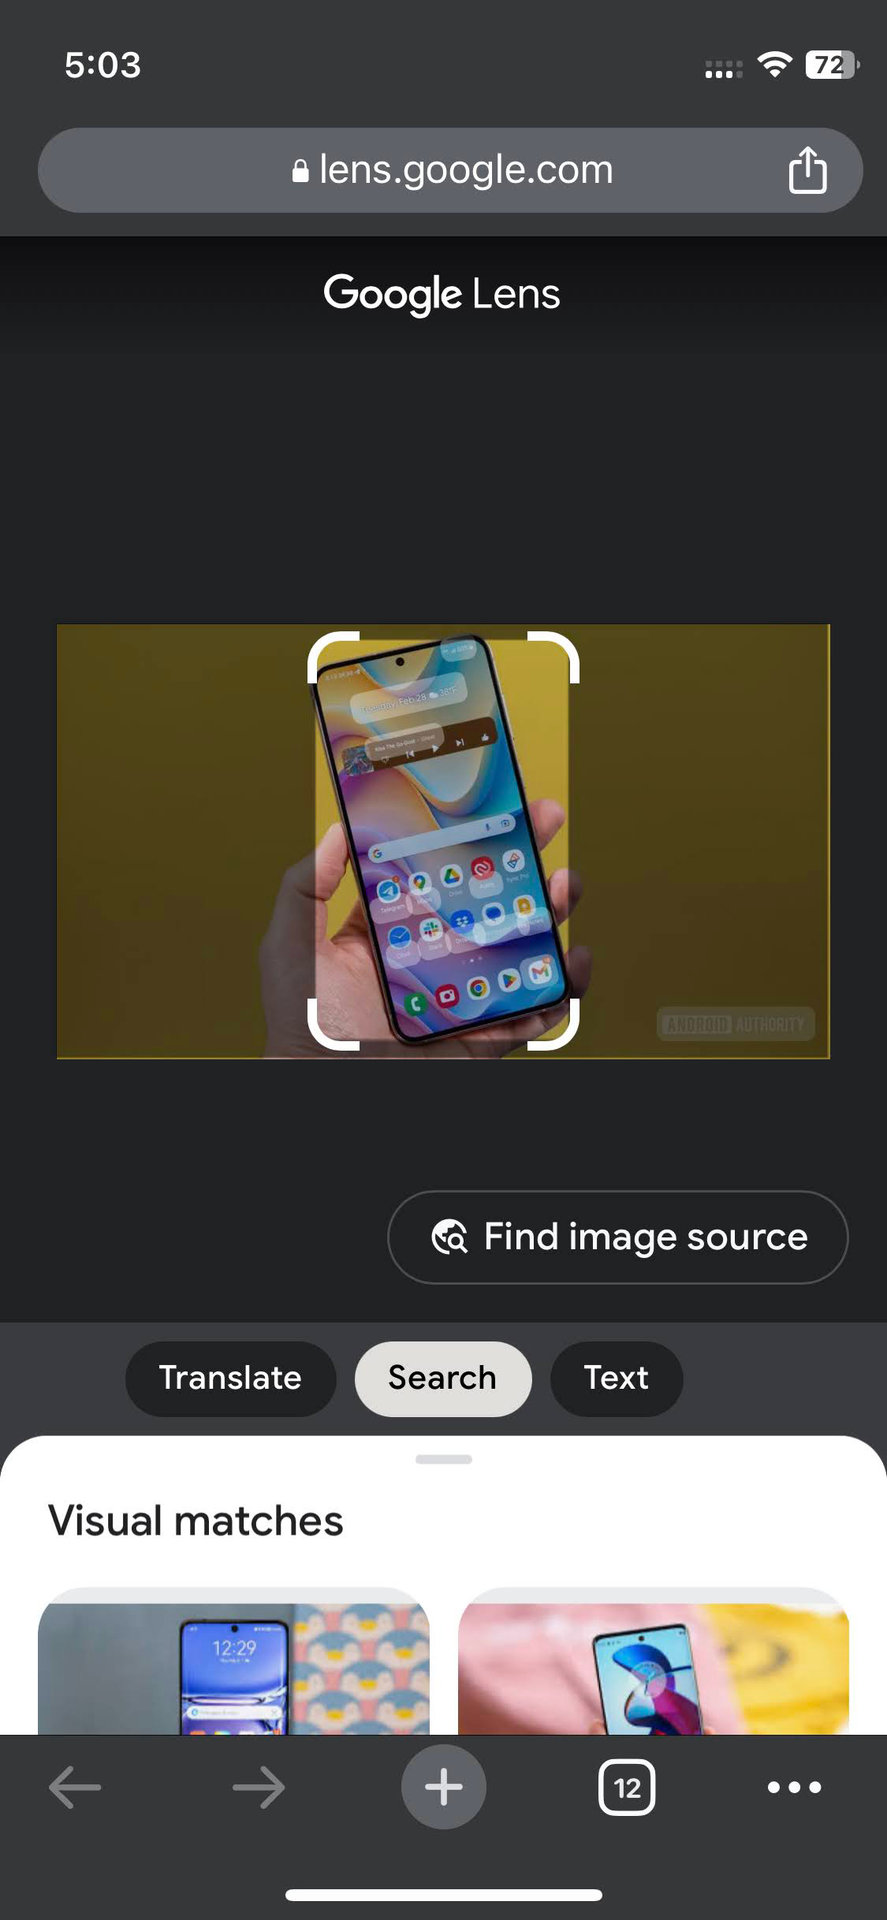 How to search image with Google on Chrome for iOS 3